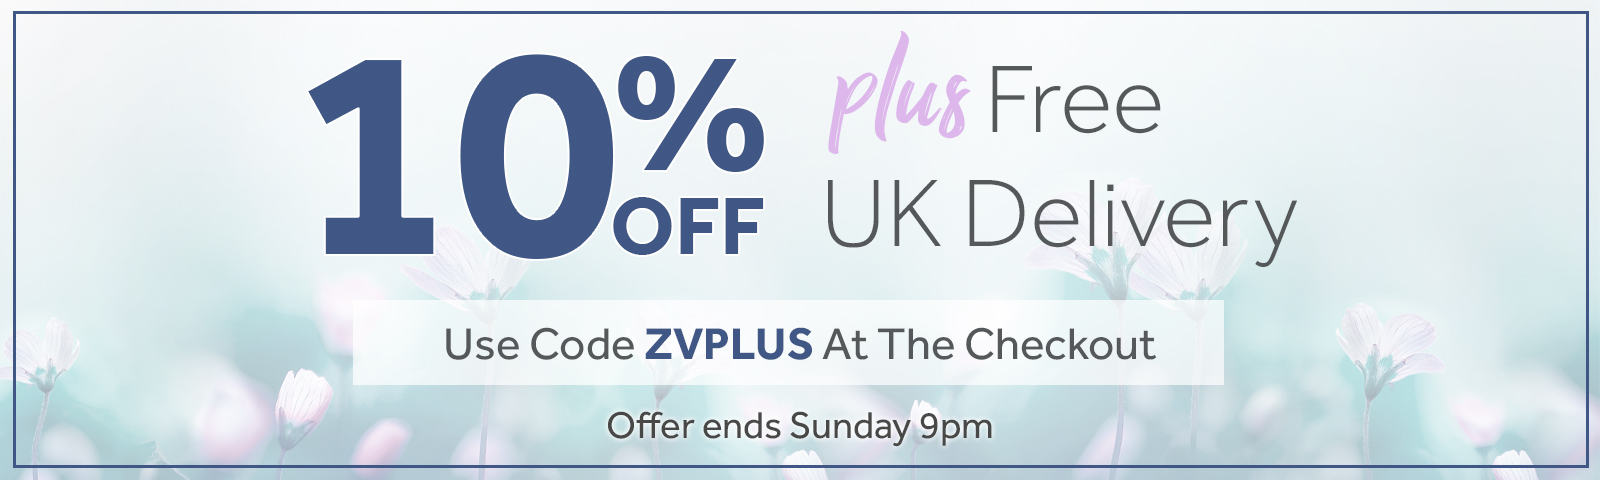 10% Off Plus Free UK Delivery This Week